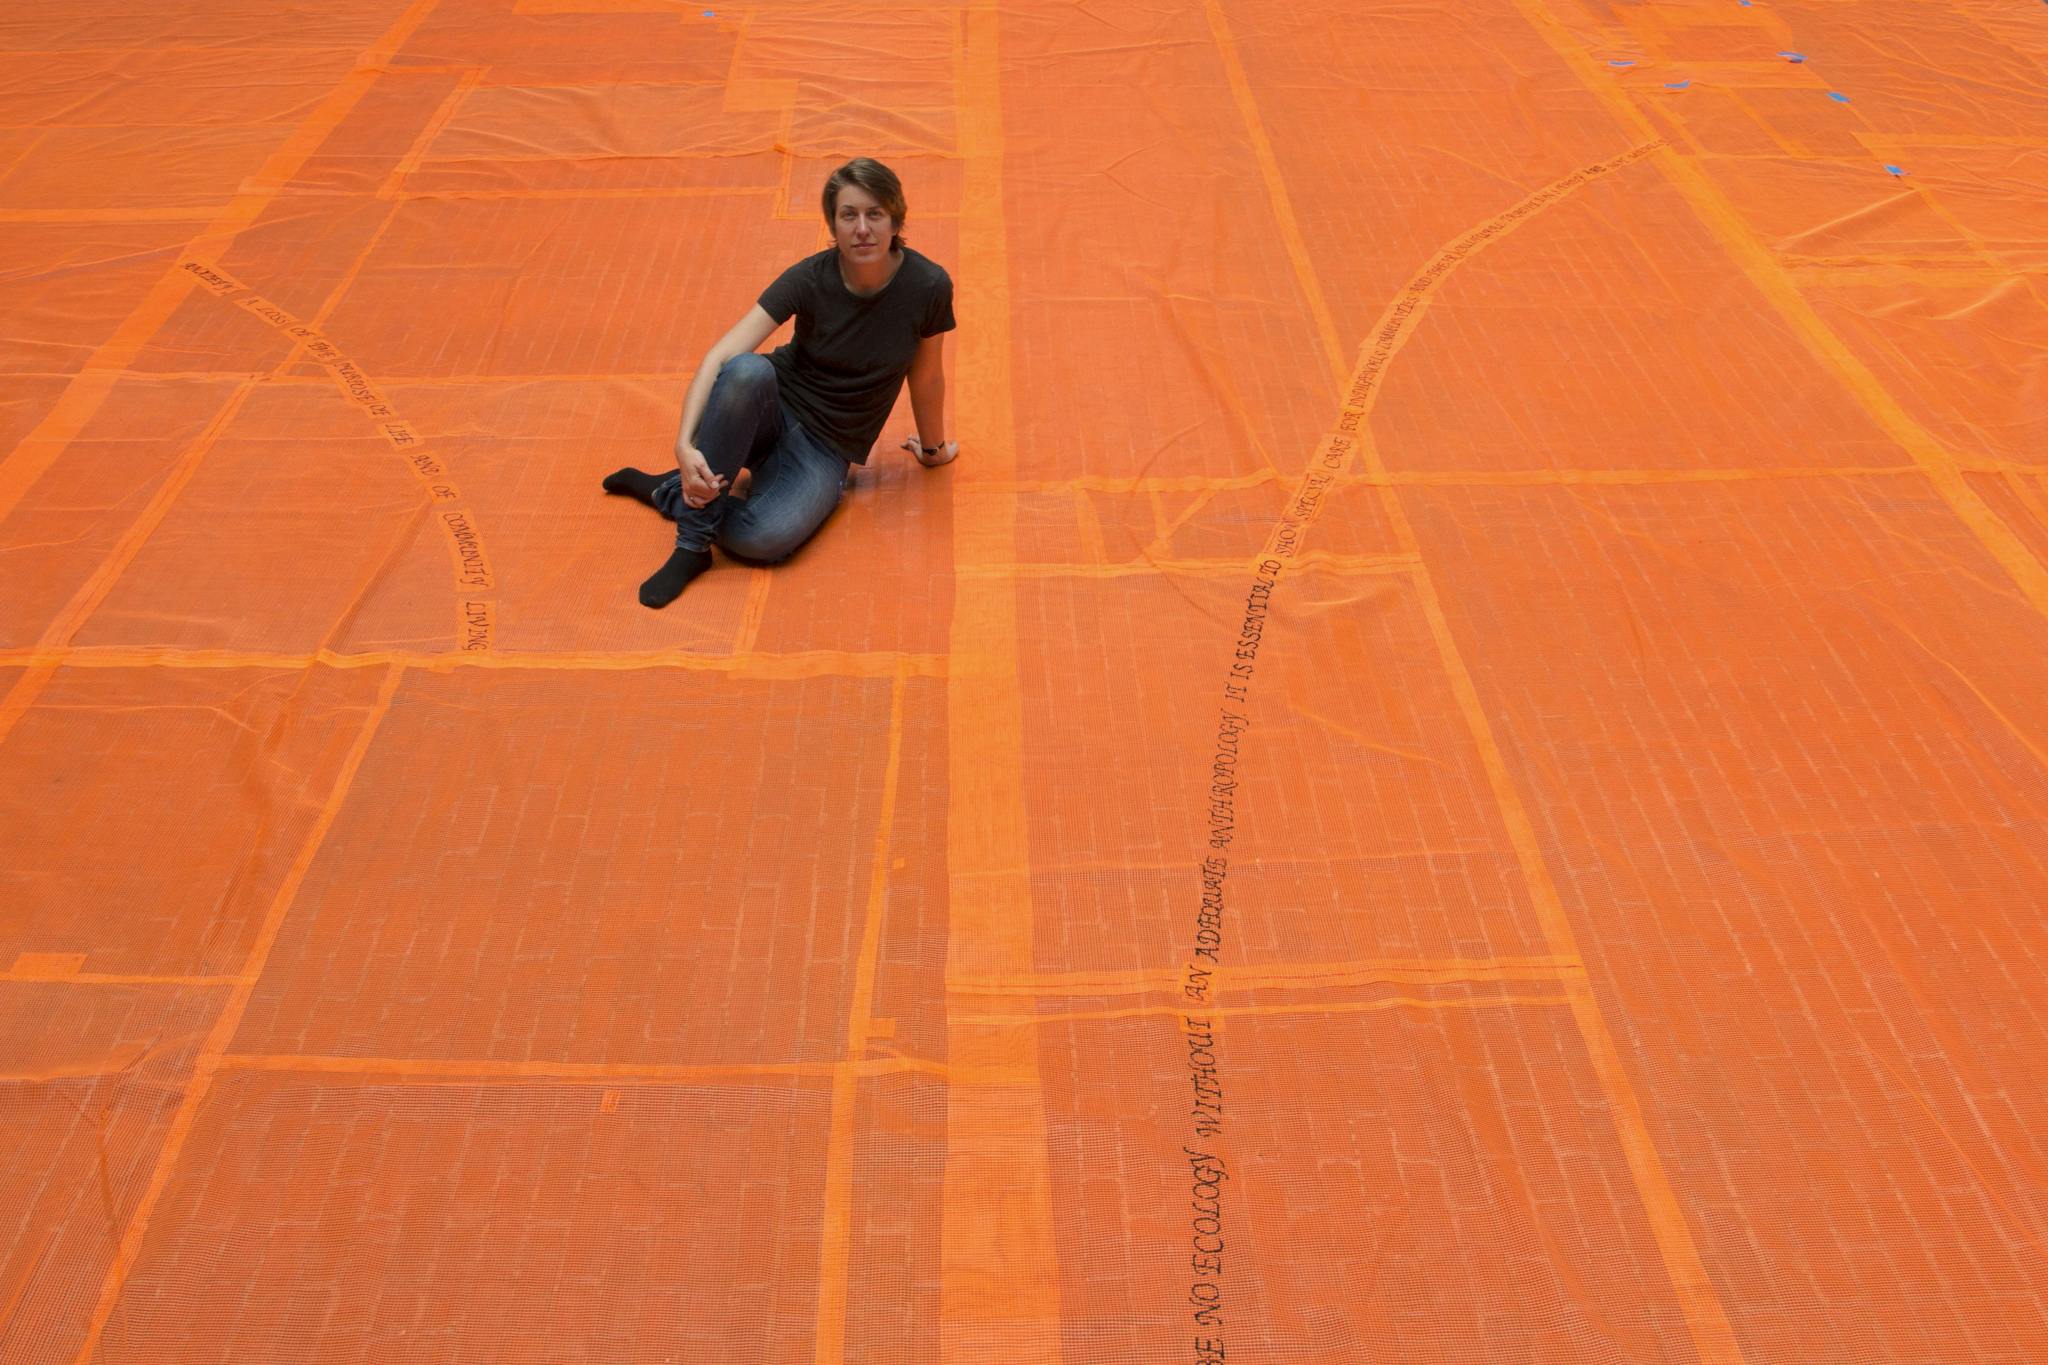 Stephanie Cardon sits on the orange, embroidered netting featured in her installation.